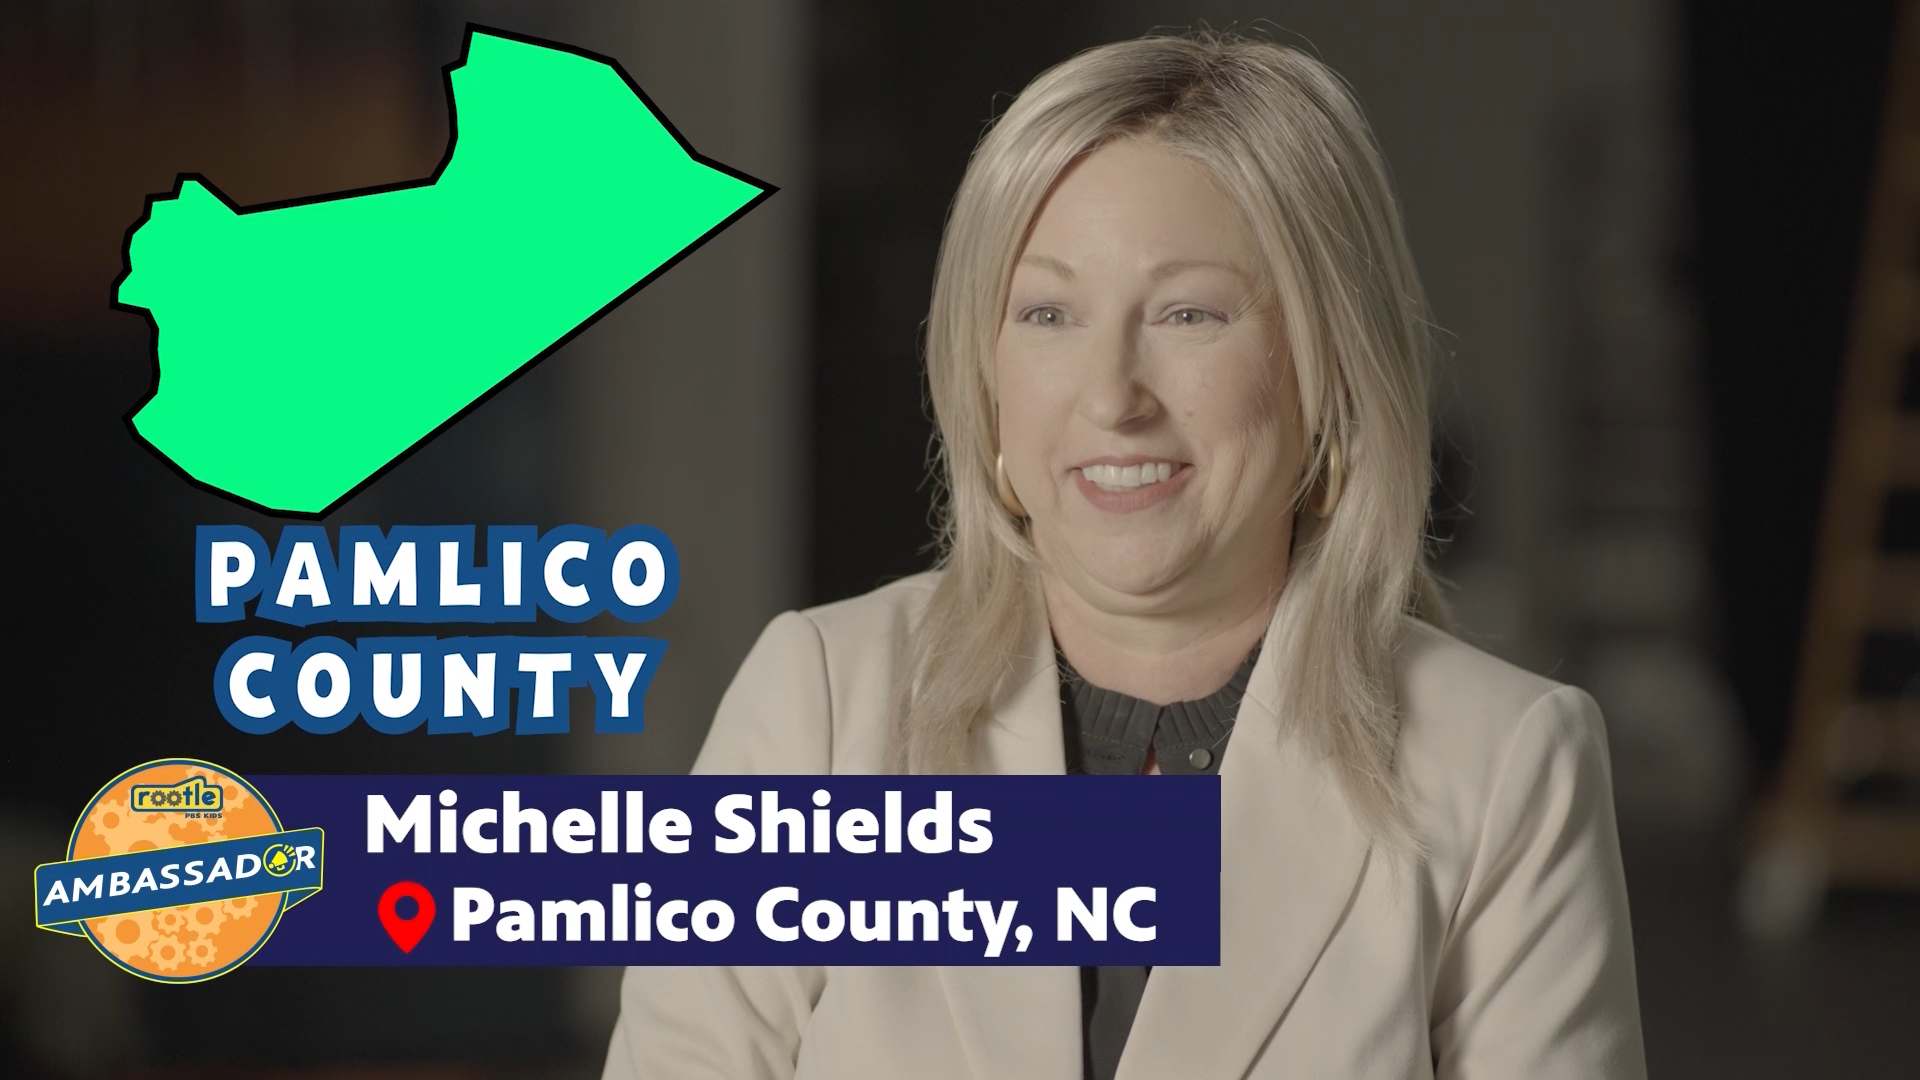 Meet Michelle Shields, Pamlico County Rootle Ambassador